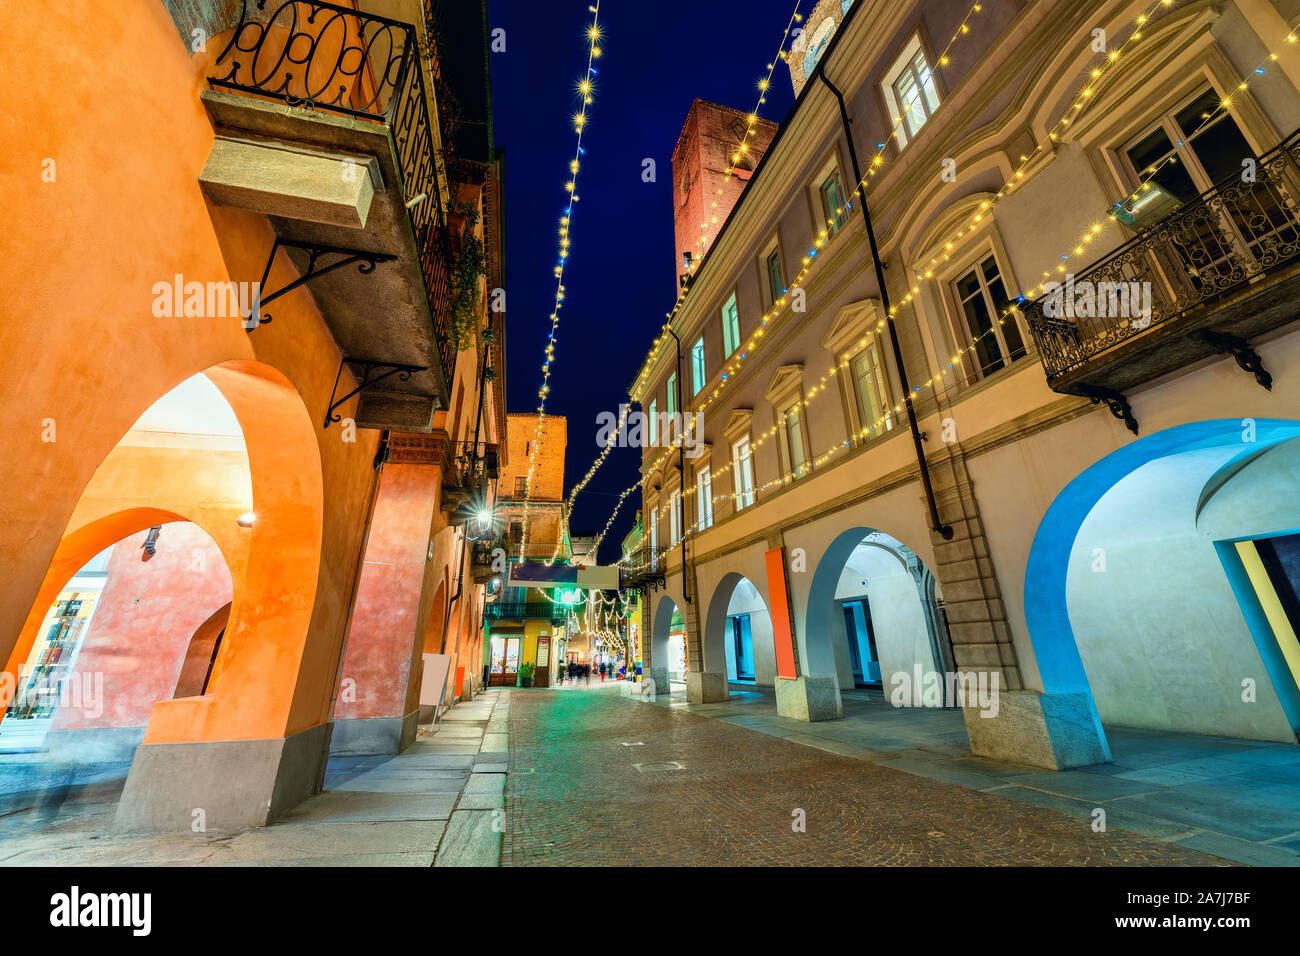 Cobblestone pedestrian street illuminated in evening with Christmas lights in Old Town of Alba, Piedmont, Northern Italy. Stock Photo